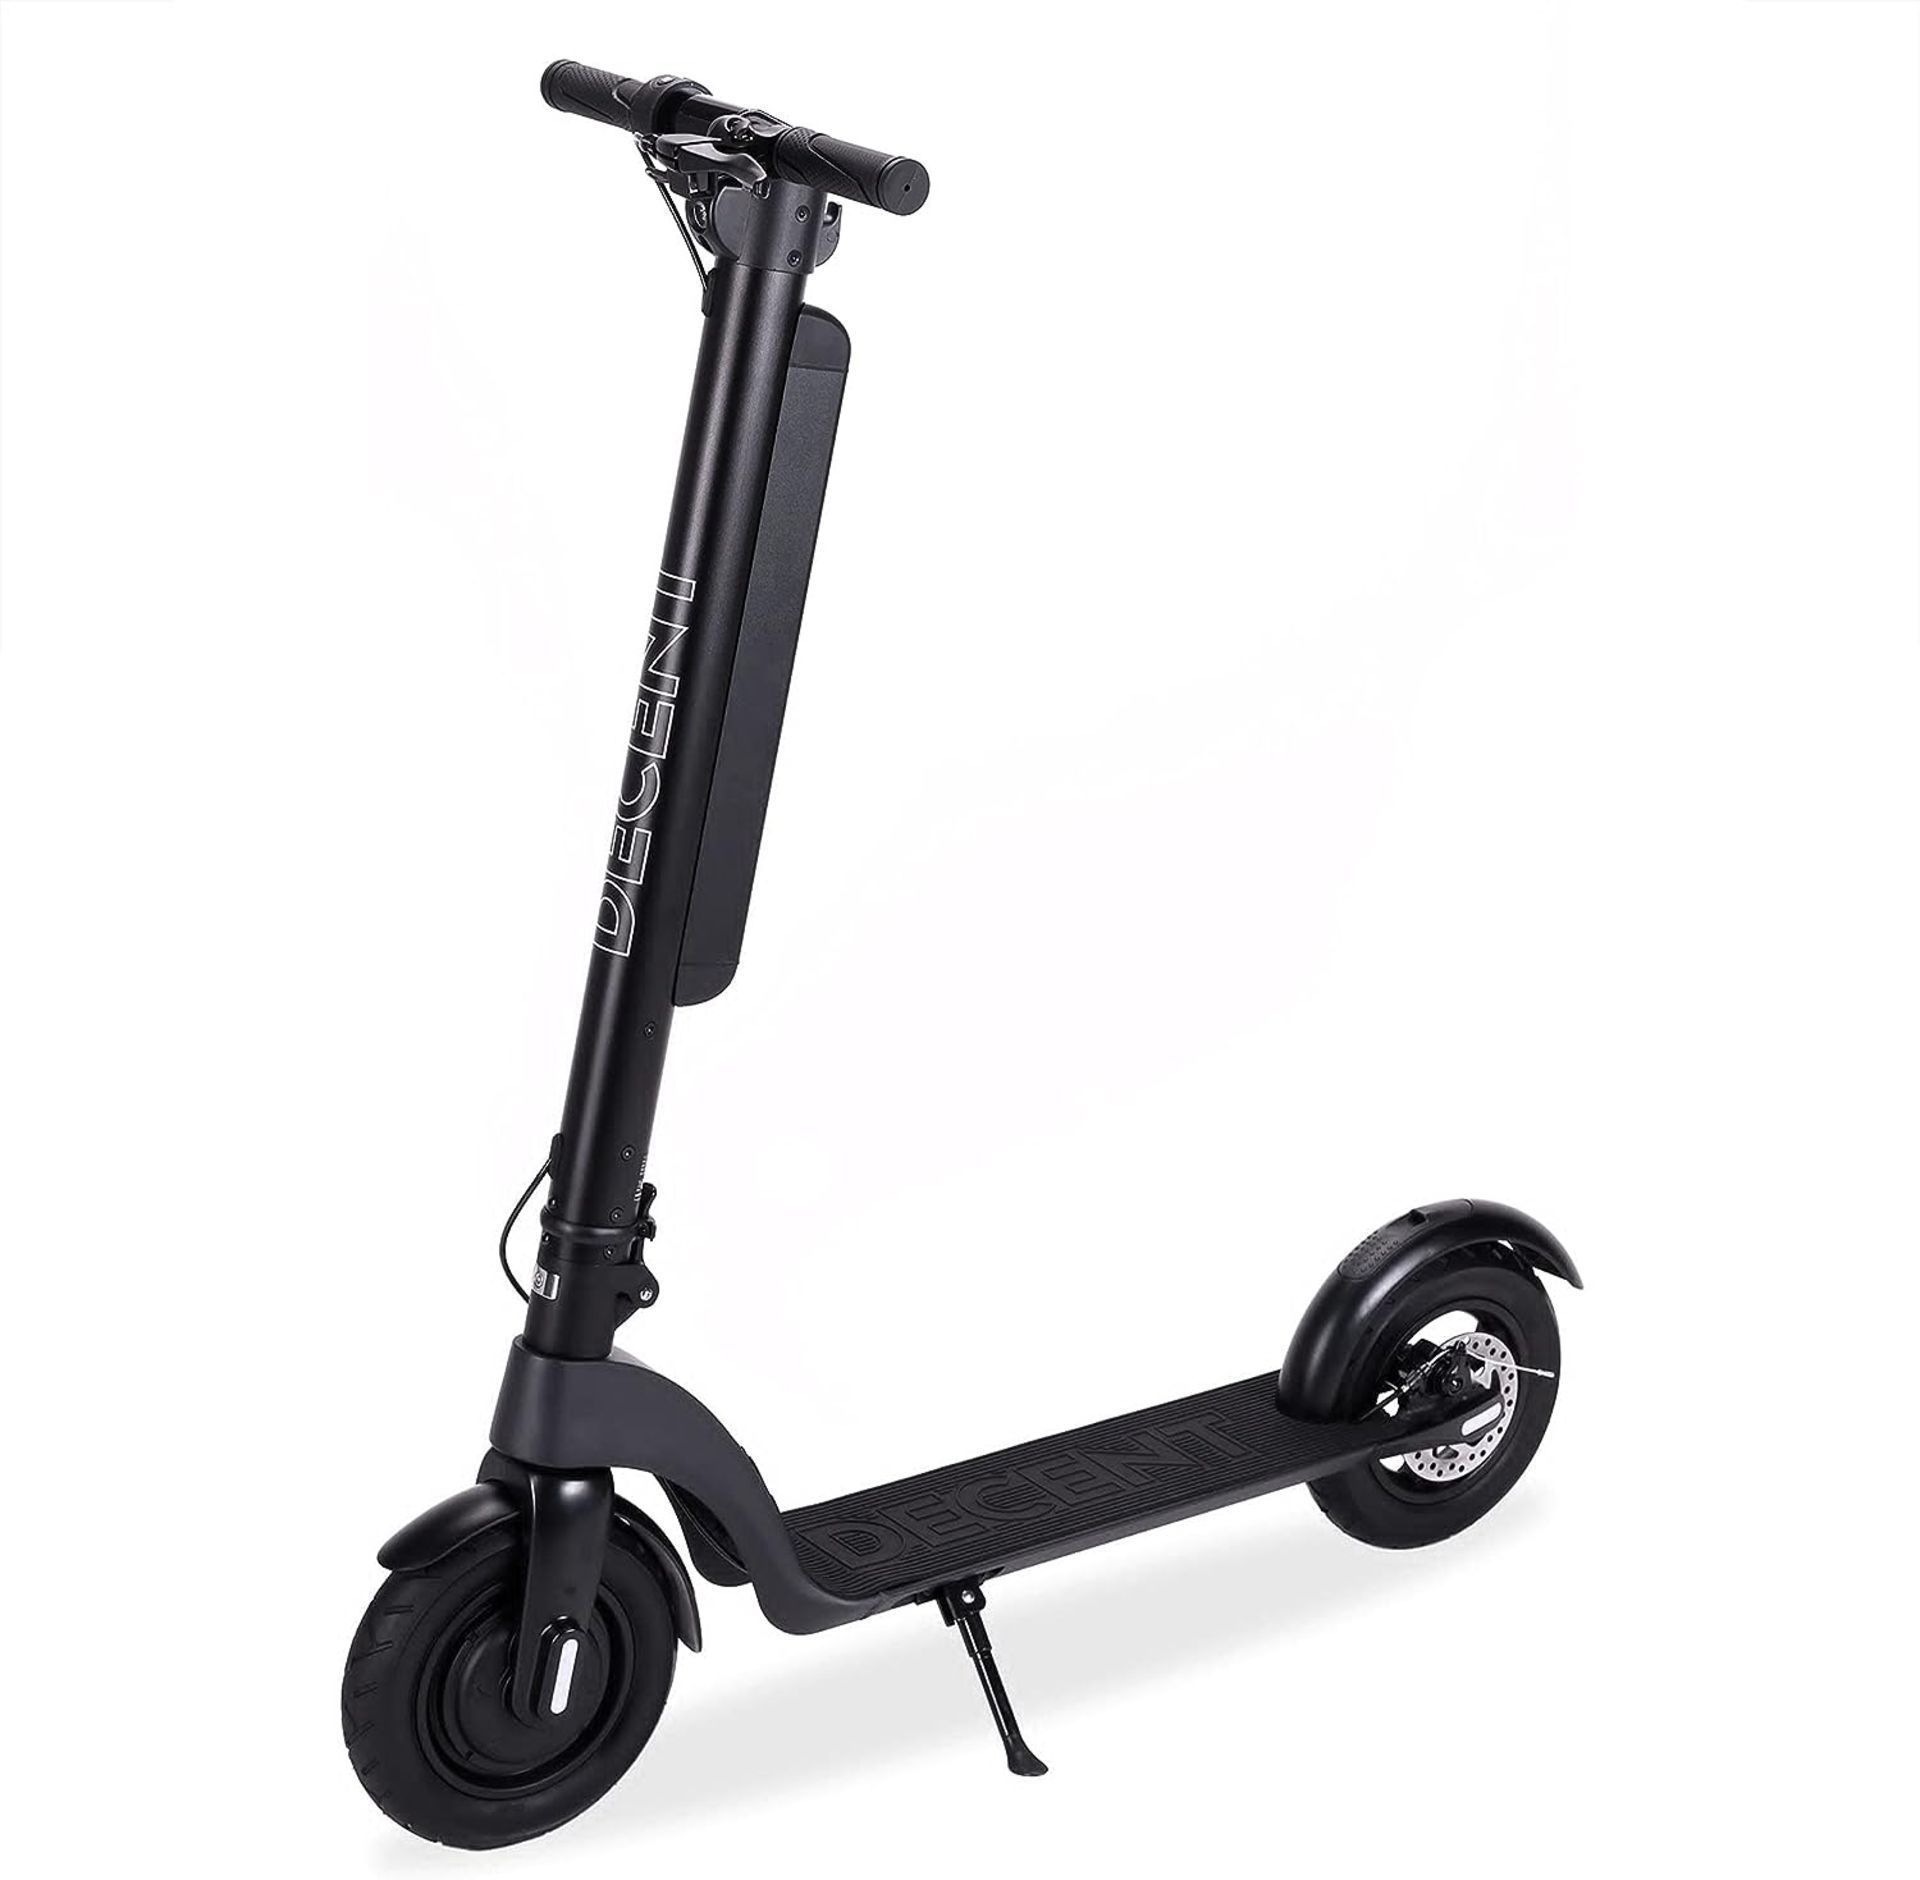 Trade Lot 4 x New & Boxed Decent One Max Electric Scooter - Black. RRP £699.99. The Decent One Max